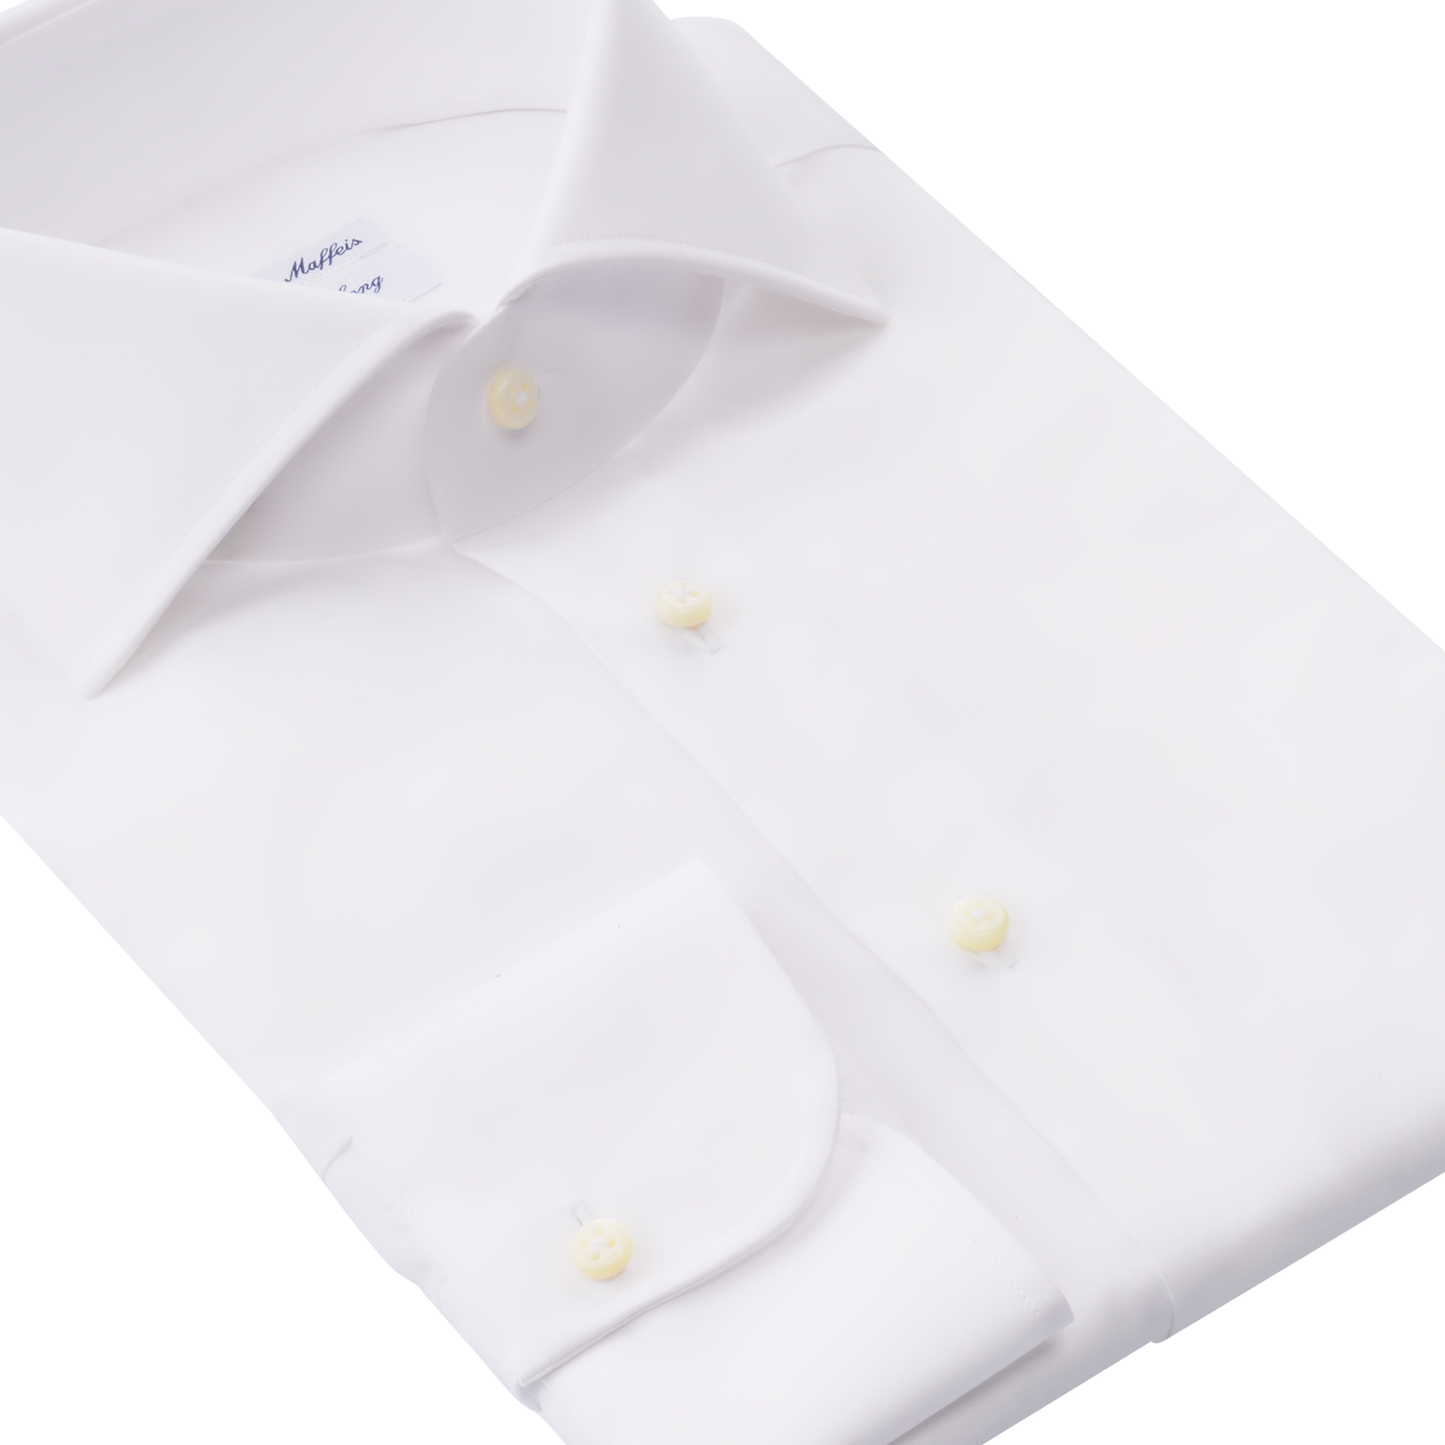 Emanuele Maffeis "All Day Long Collection" Classic Cotton White Shirt - SARTALE